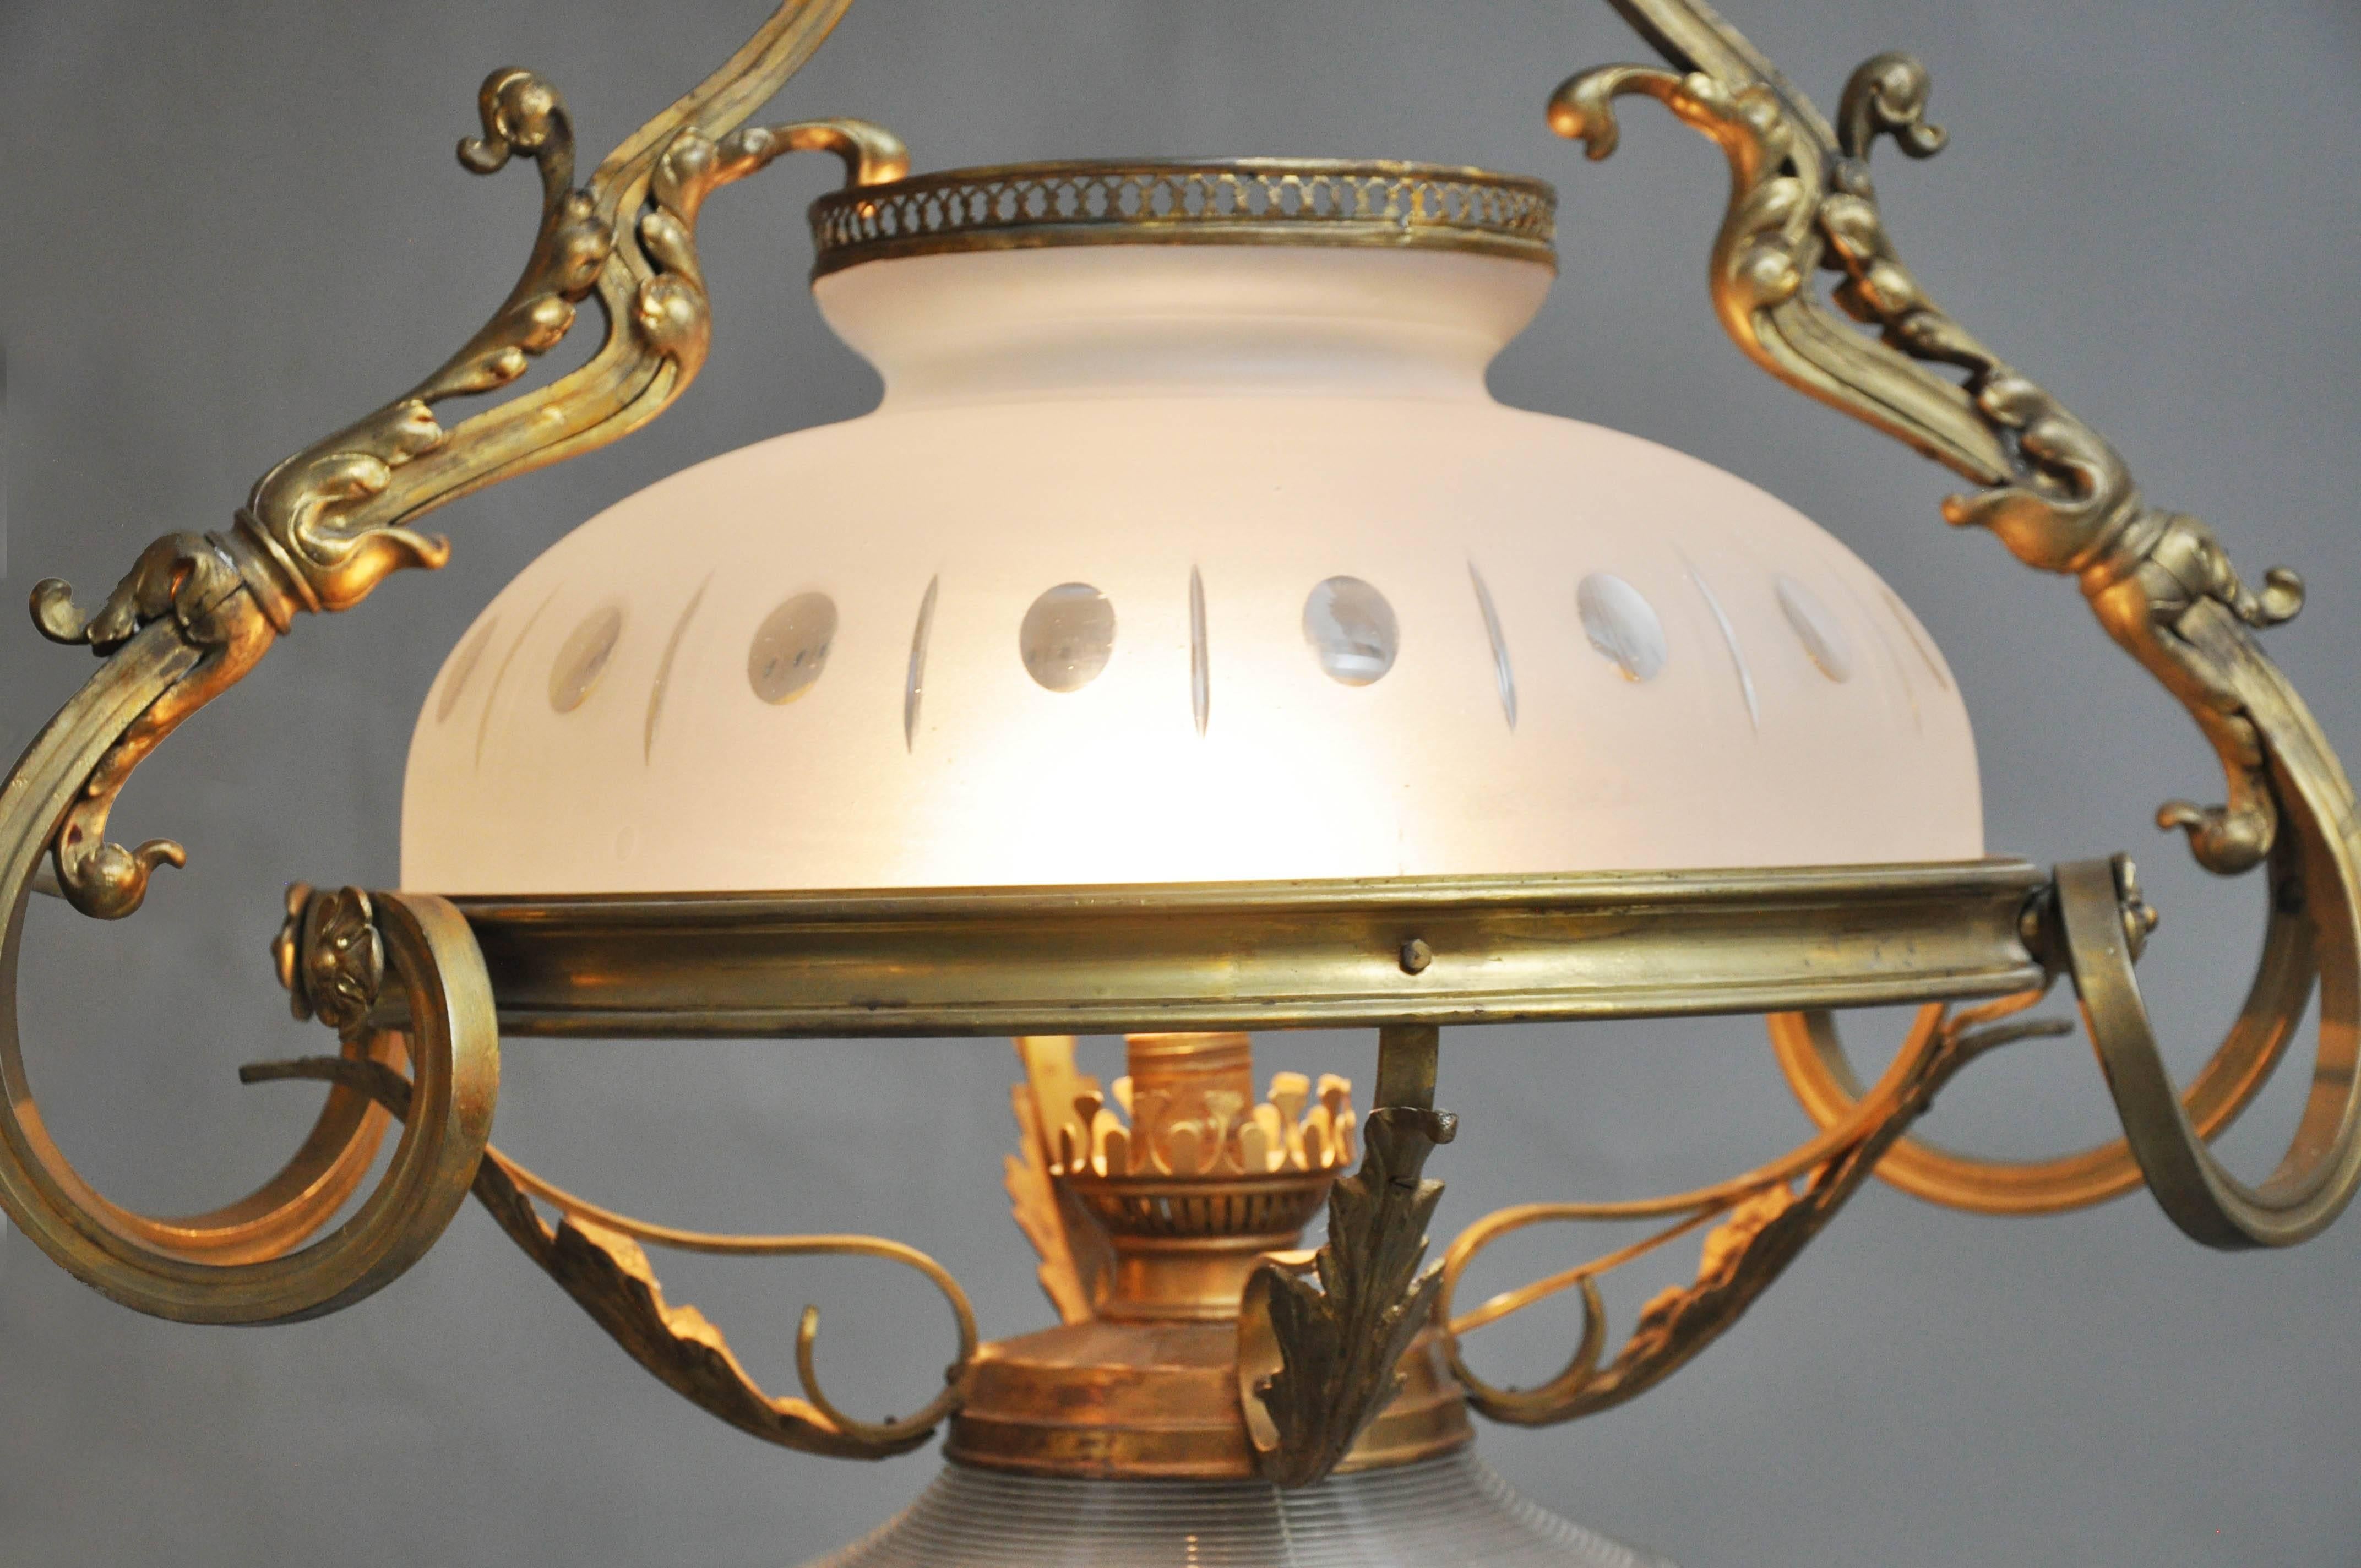 19th century French Rococo mercury bronze oil lamp chandelier originally oil converted to electric. Elaborate gold bronze scrolled frame with acanthus leaf decoration supporting a central oil lamp with dome shaped frosted acid etched shade and